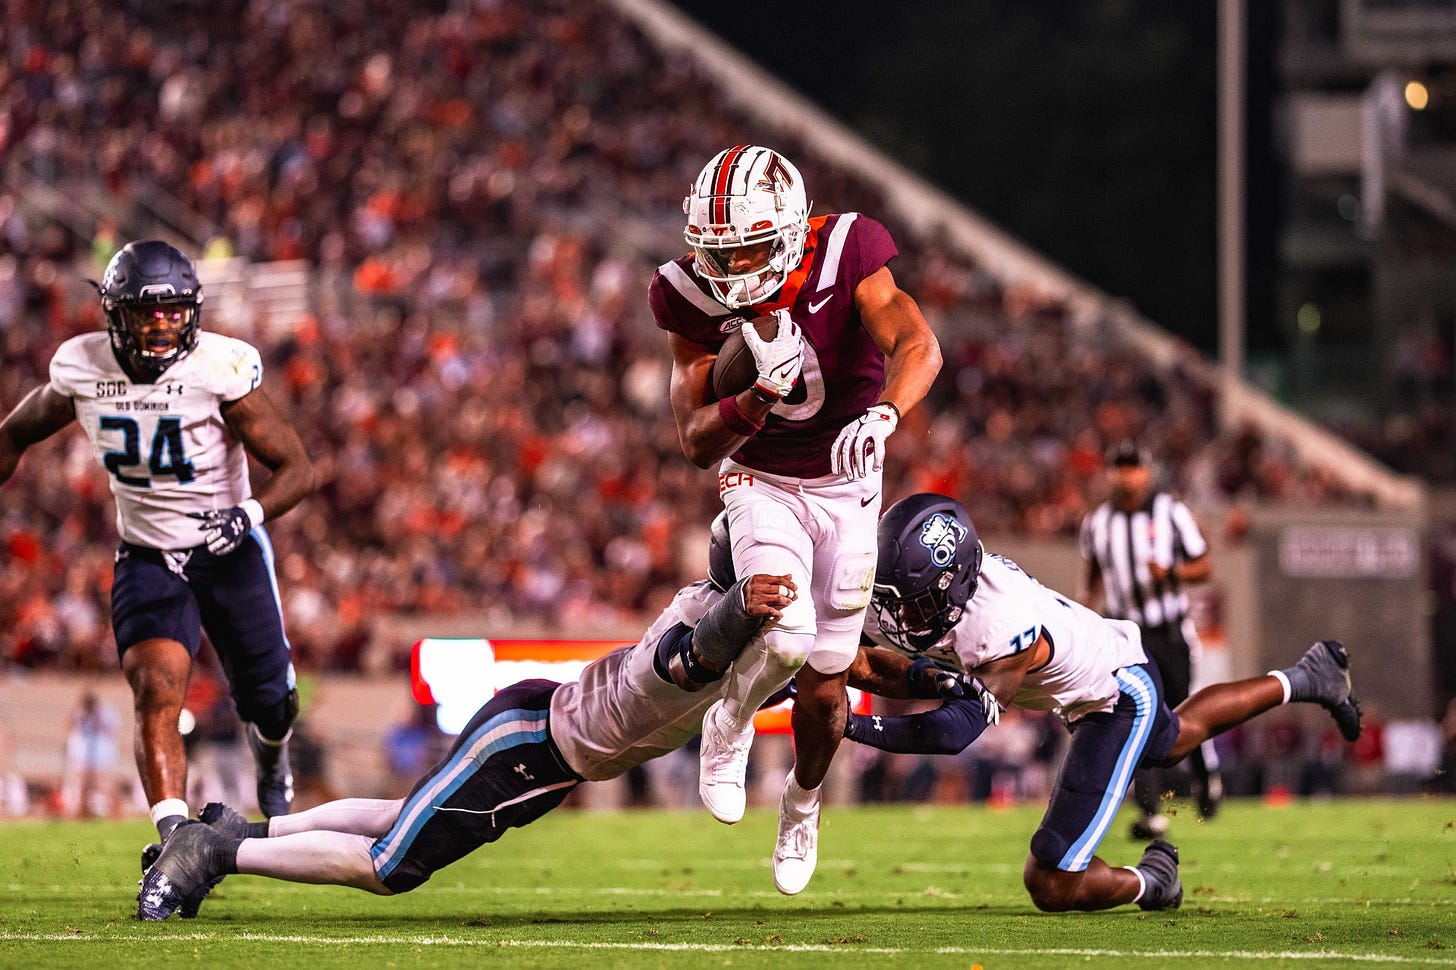 Virginia Tech wide receiver Ali Jennings breaks a tackle against Old Dominion.